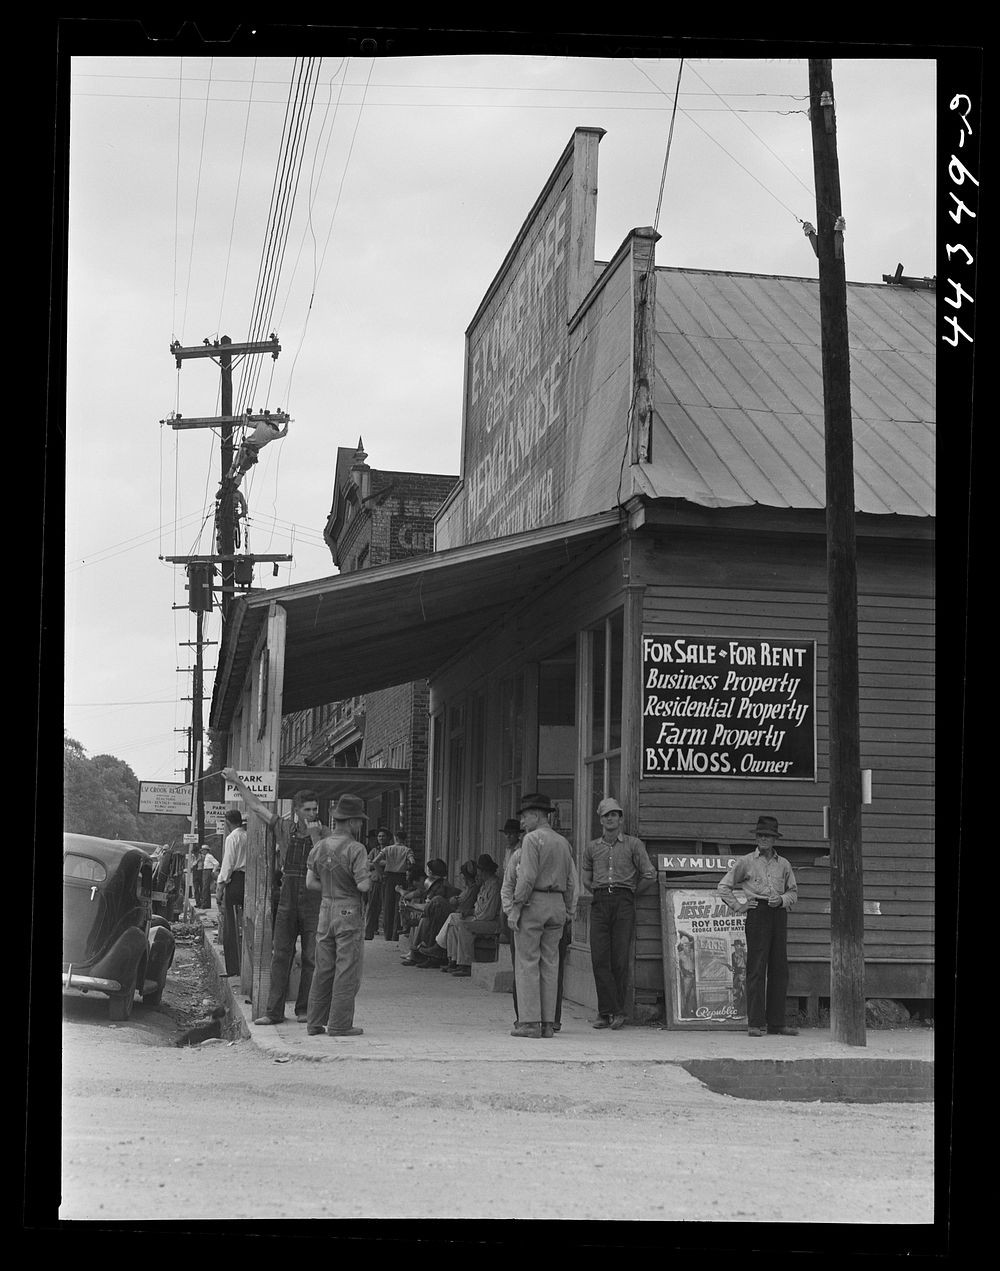 Corner on the main street of Childersburg, Alabama. Sourced from the Library of Congress.